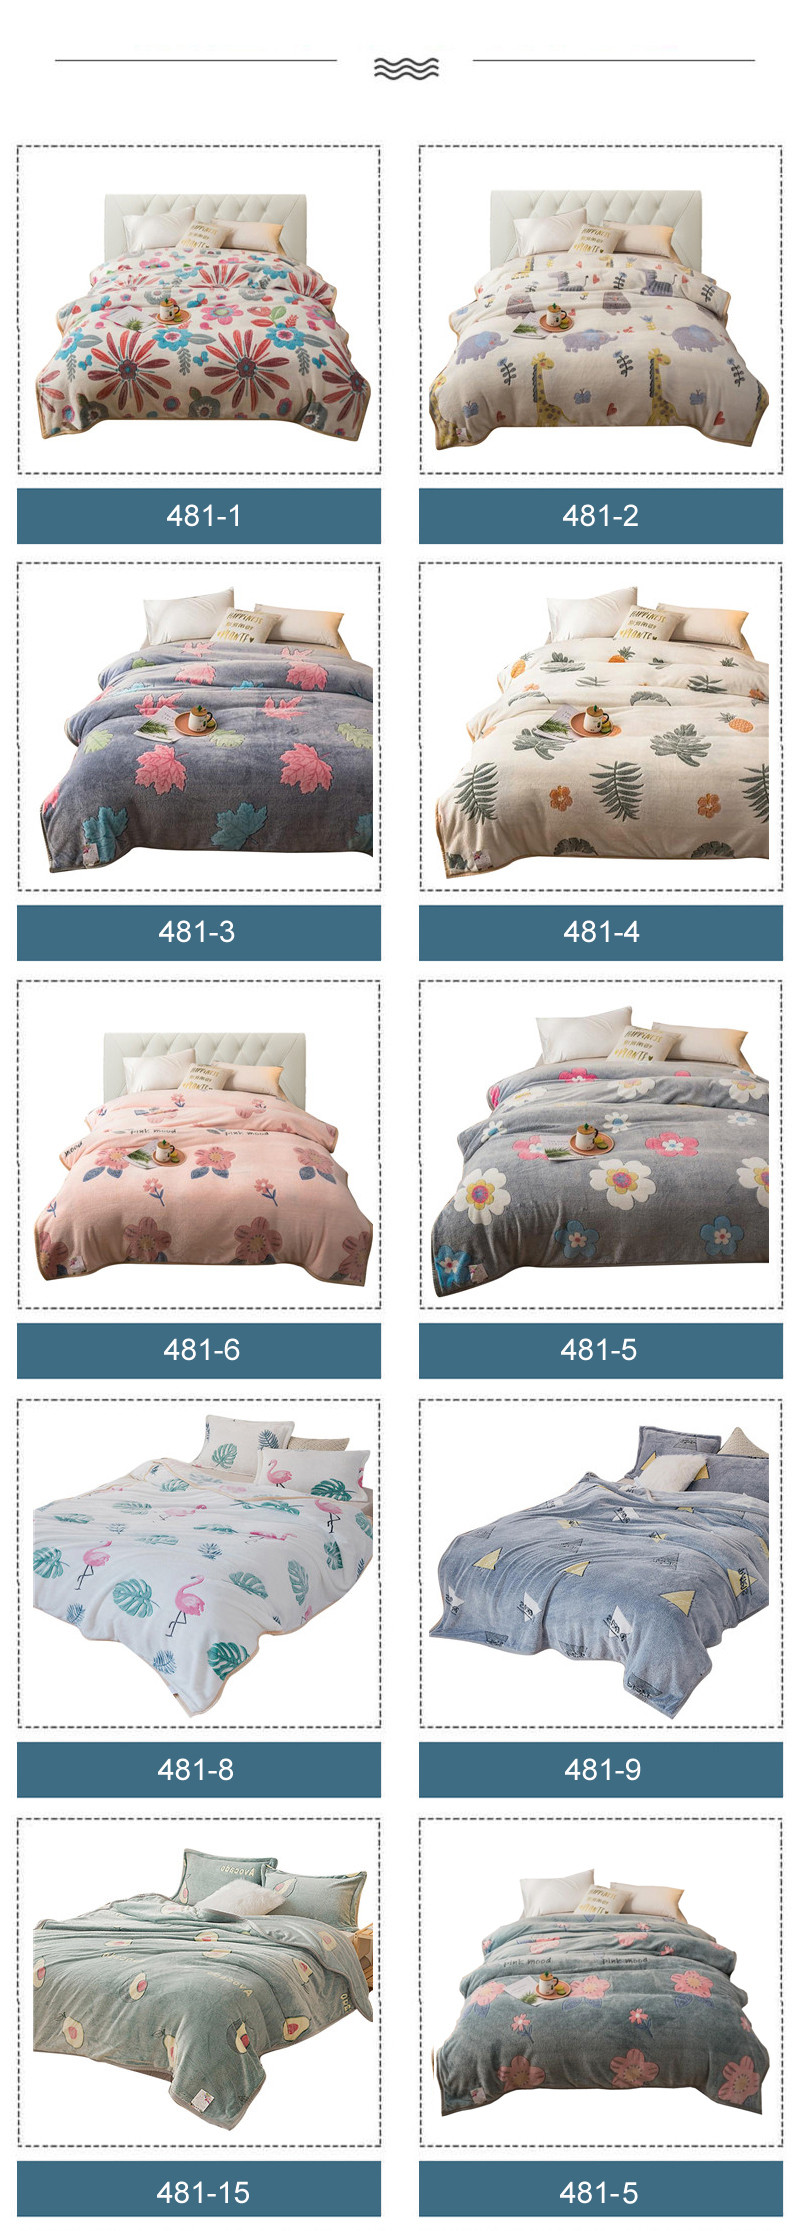 Comfortable Dual-Sided Bedding Throws